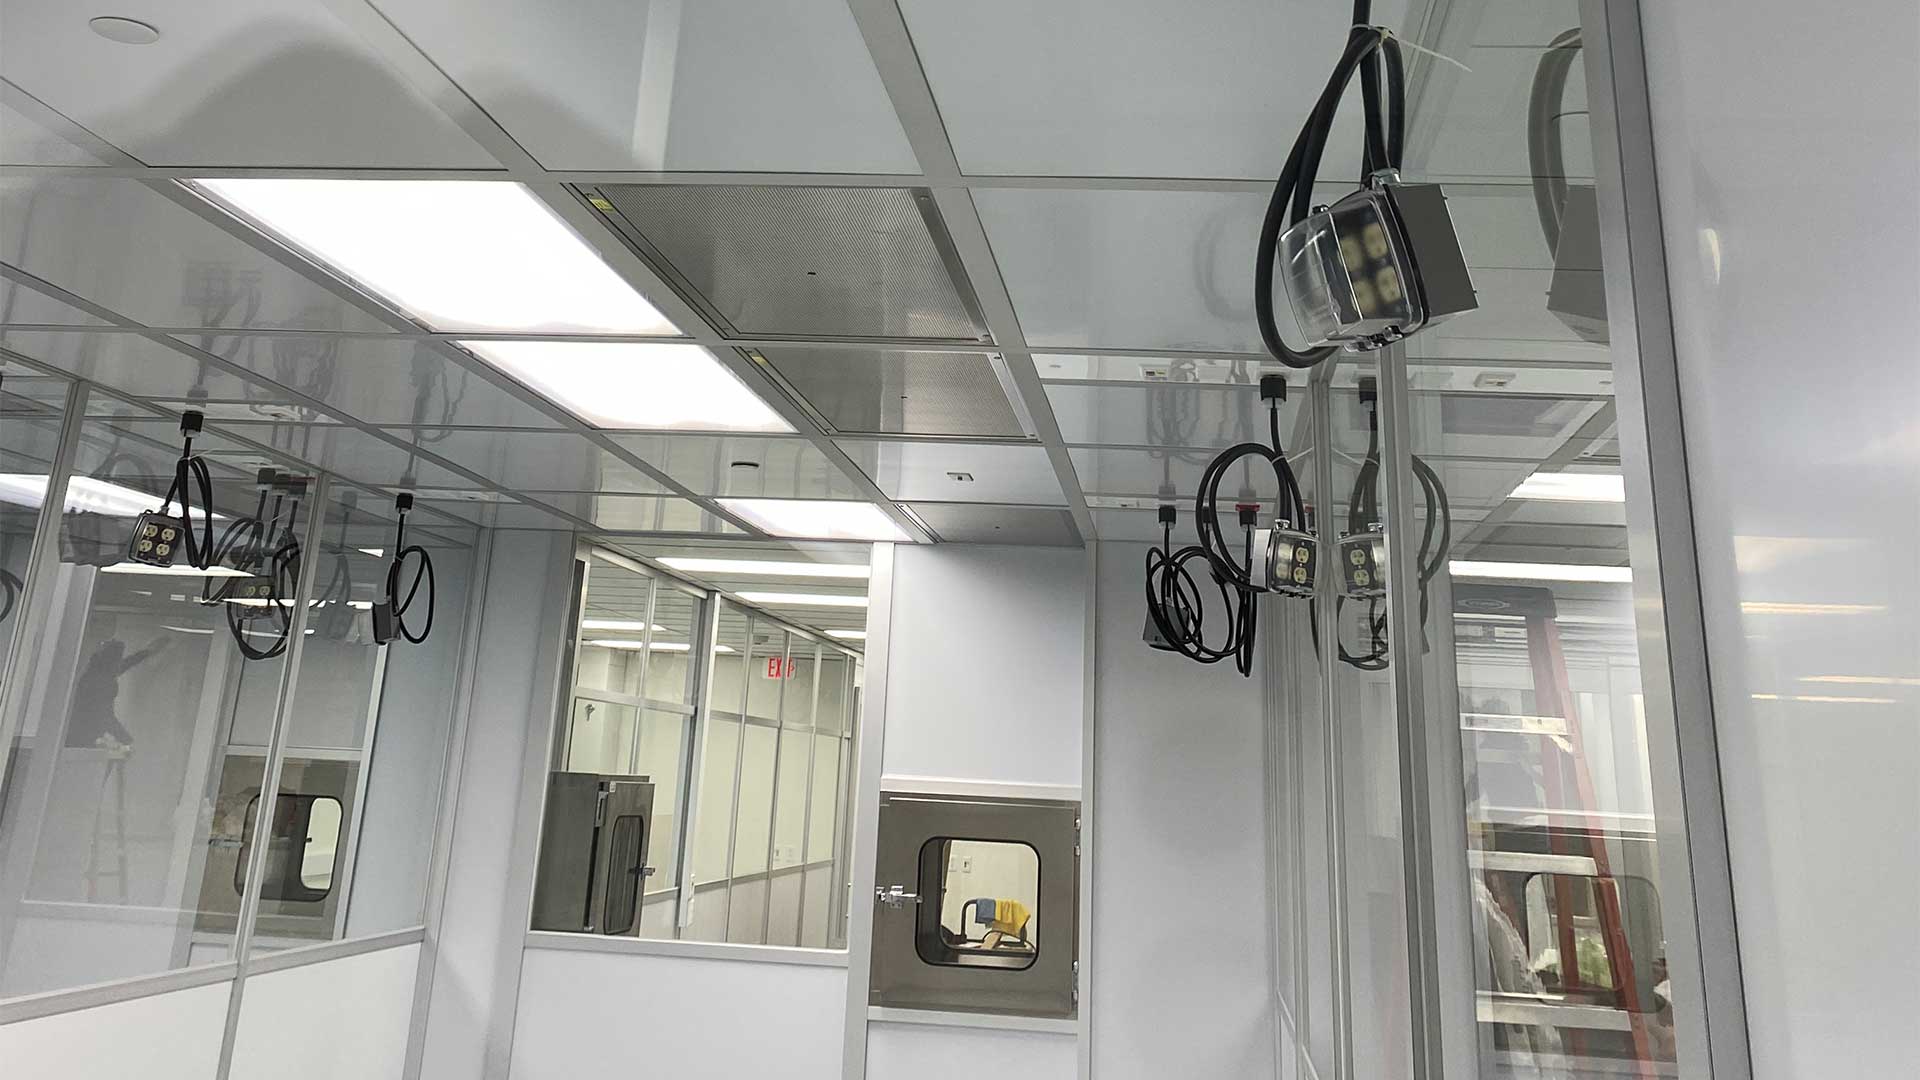 mmbt-metro-cad-boston-scientific-cleanroom-hardwall-ceiling-outlet-boxes